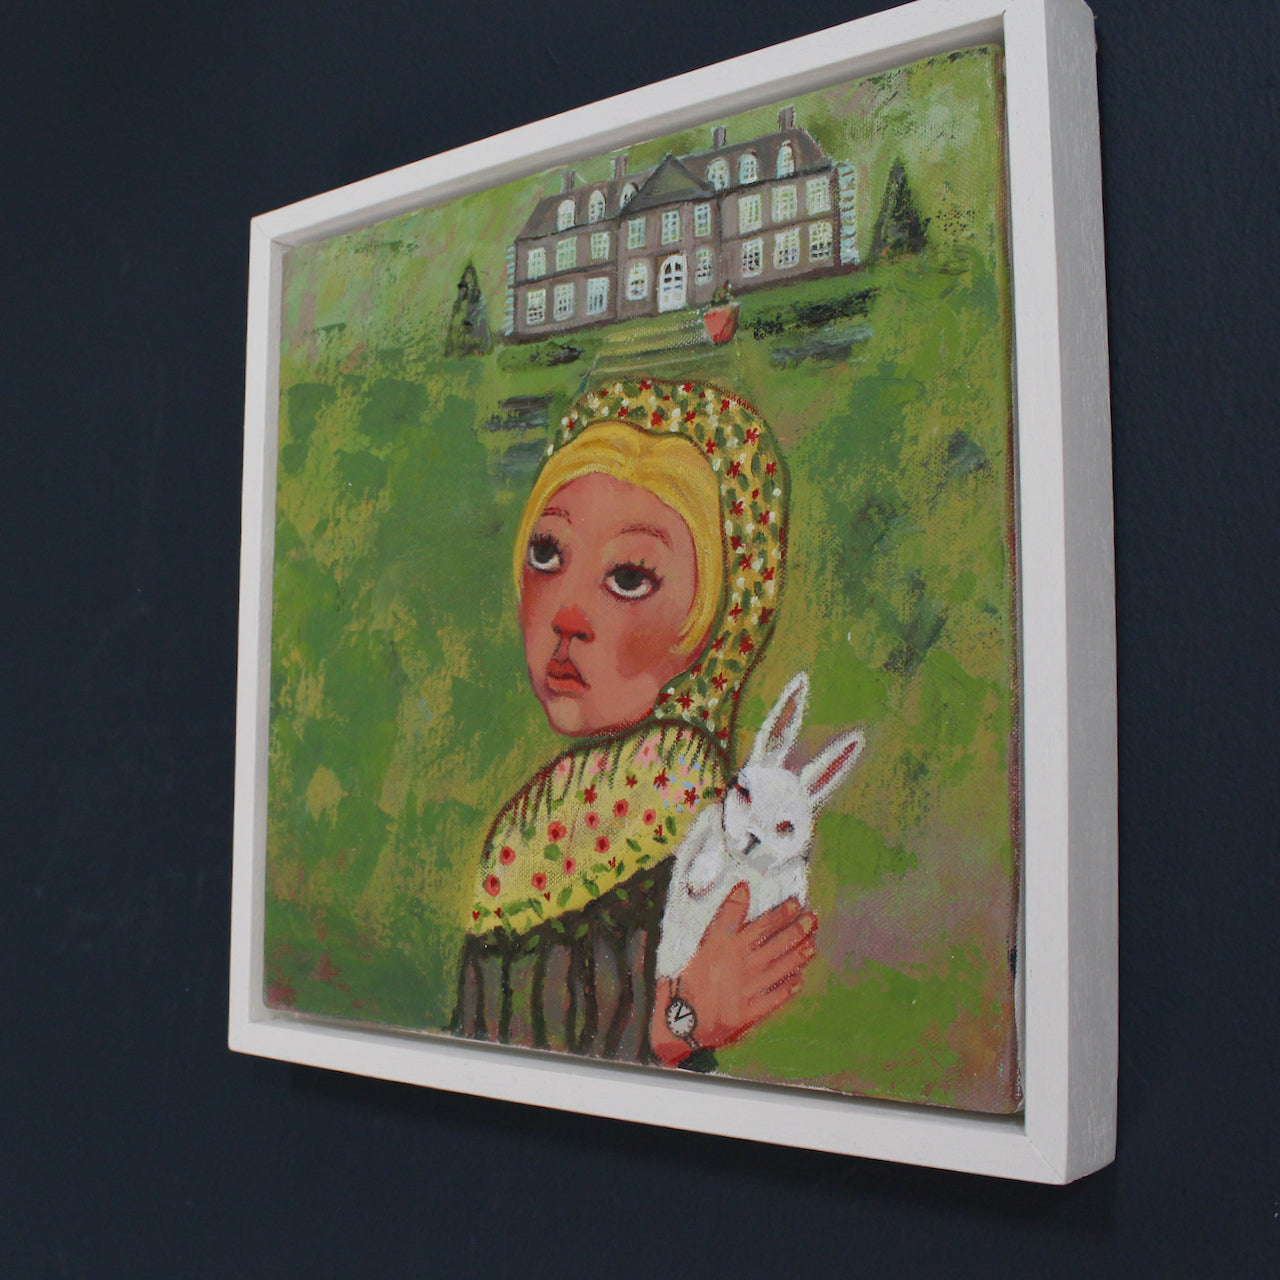 painting by Cornwall artist Siobhan Purdy of a blonde haired girl holding a rabbit standing in front of a large house and garden.